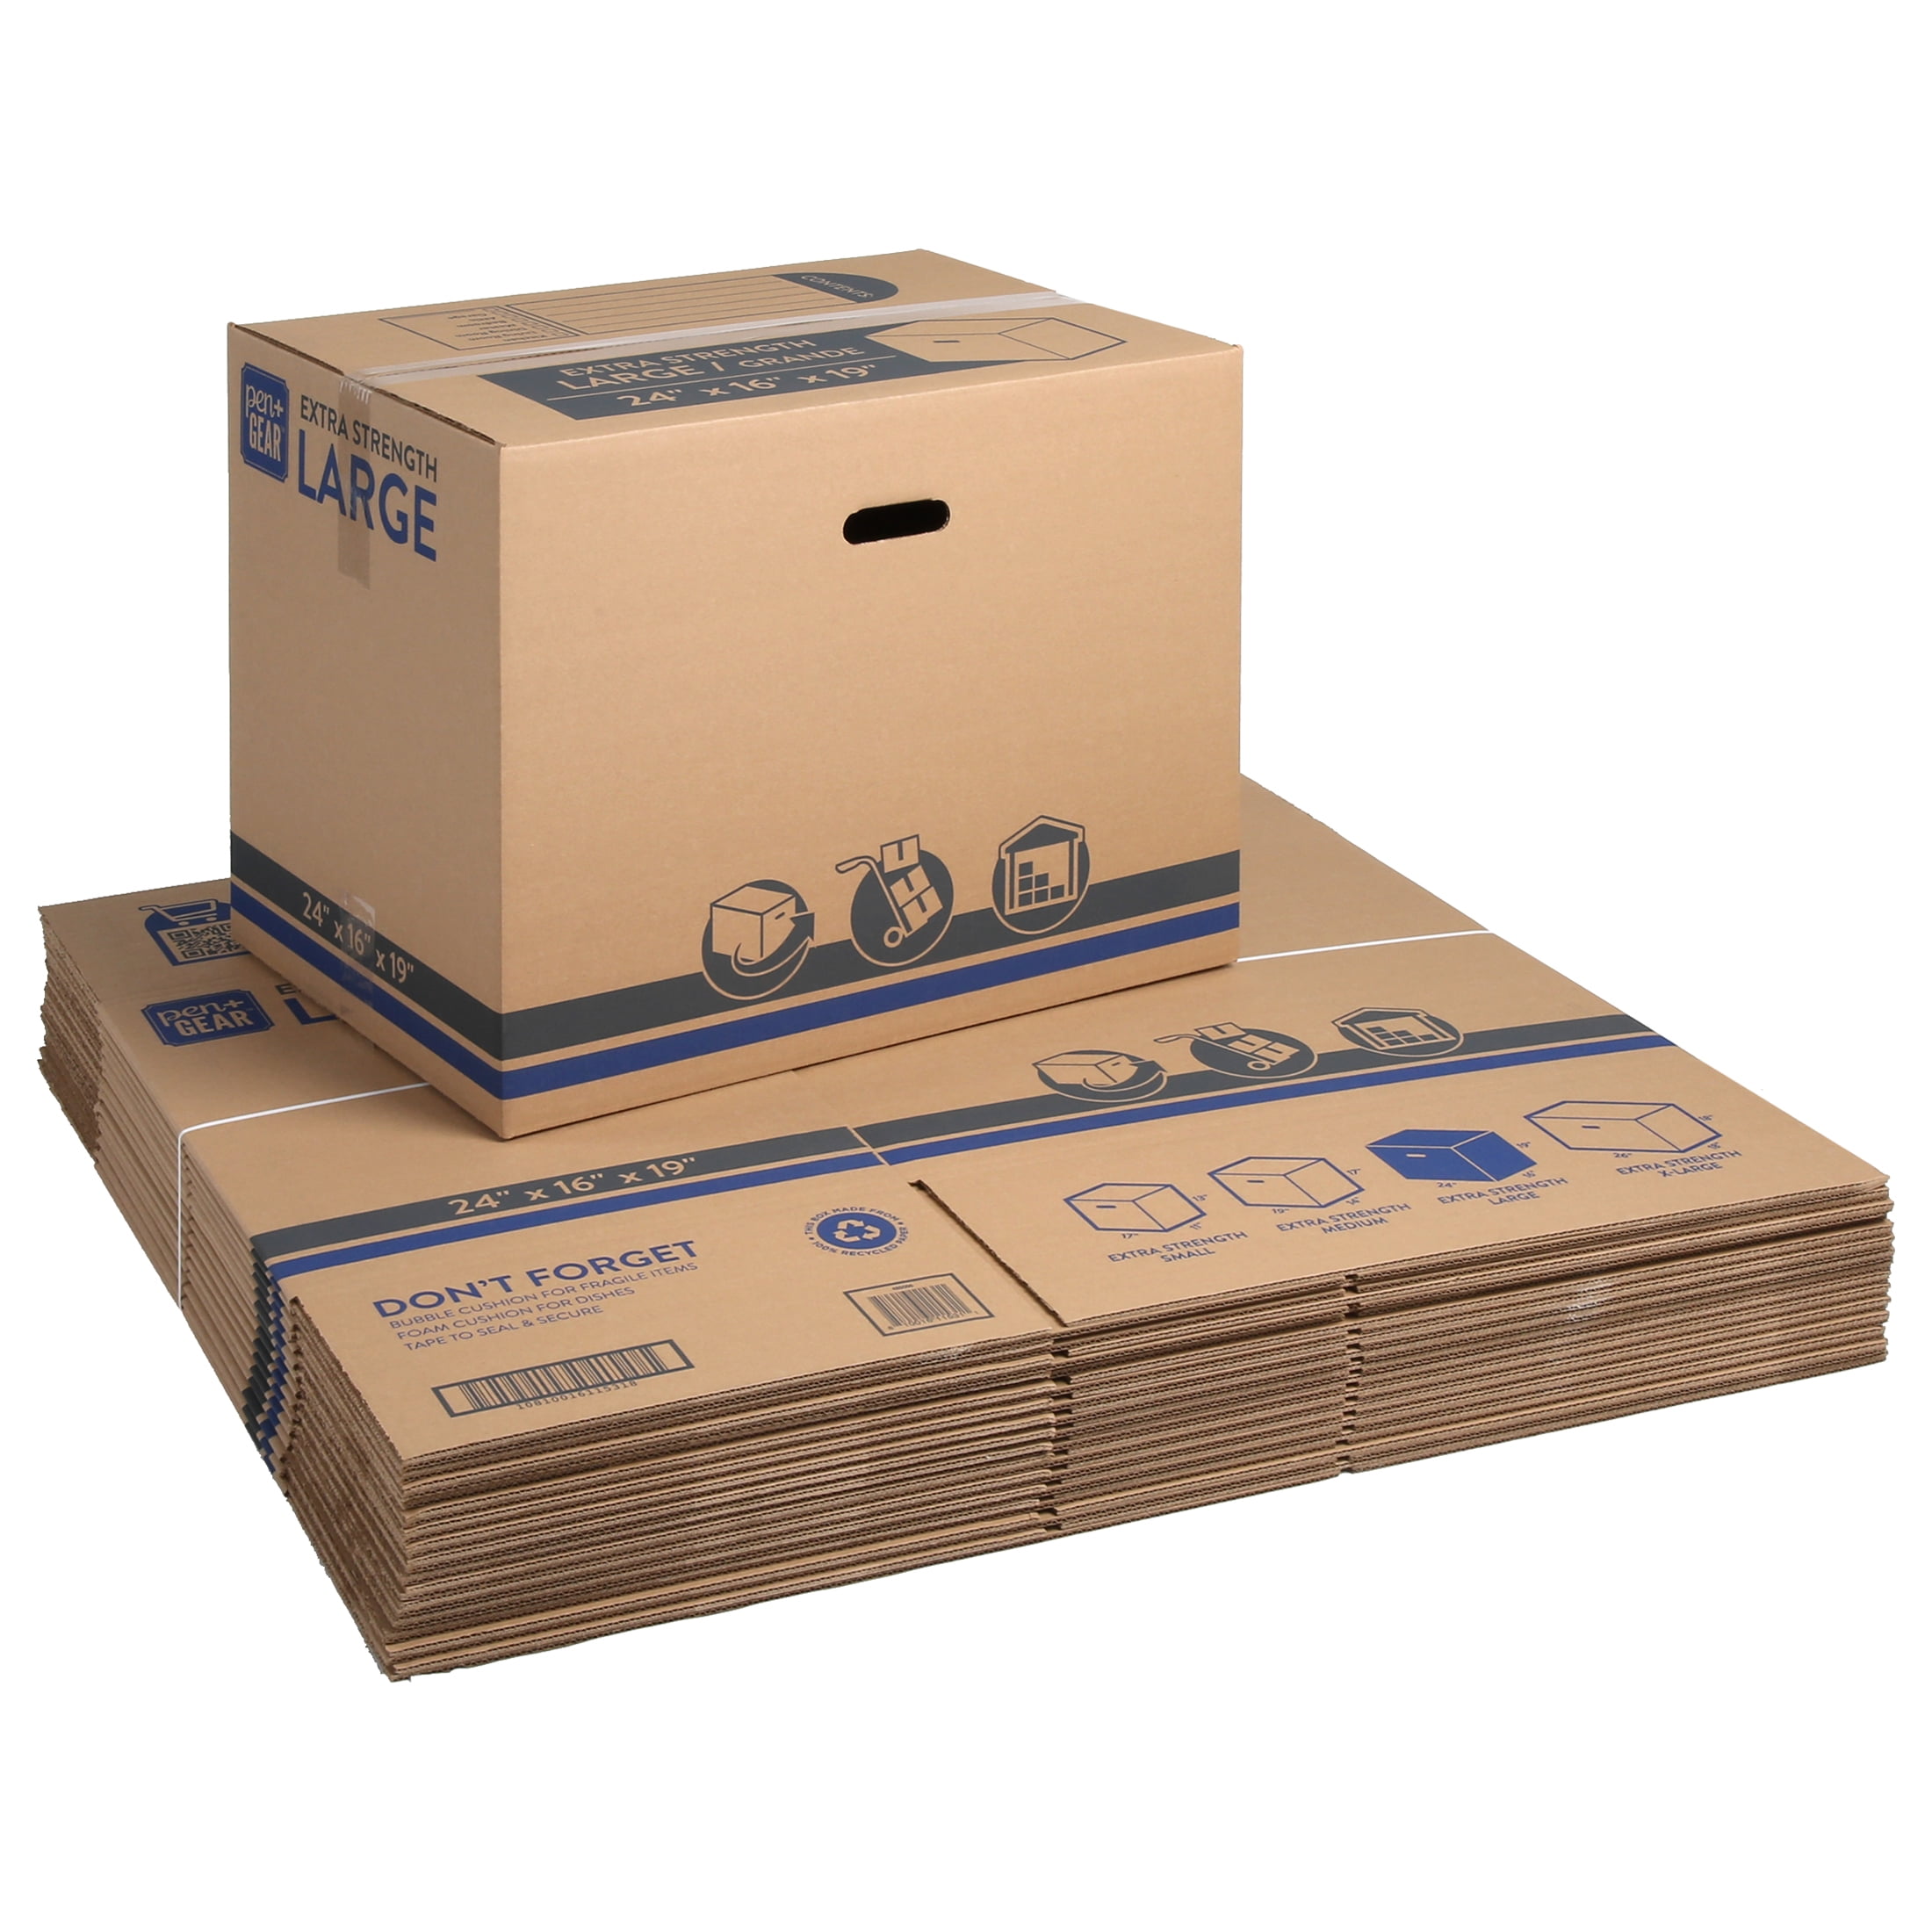 100 X-LARGE S/W CARDBOARD PACKING BOXES 20x20x28" MAXIMUM SIZE YODEL PARCELFORCE 